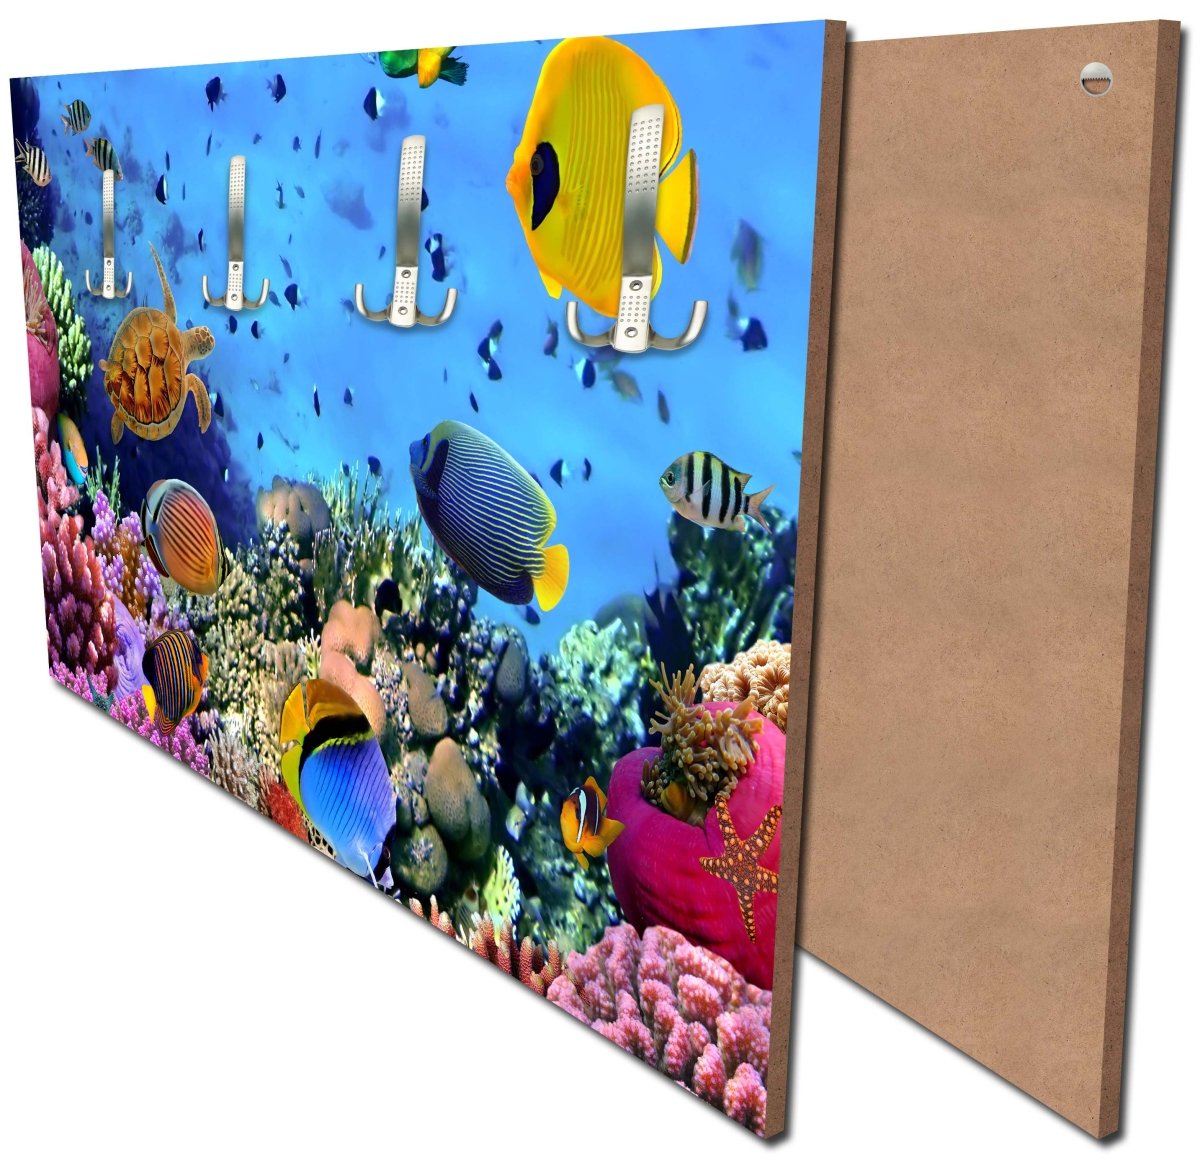 Wardrobe coral reef with fish M0480